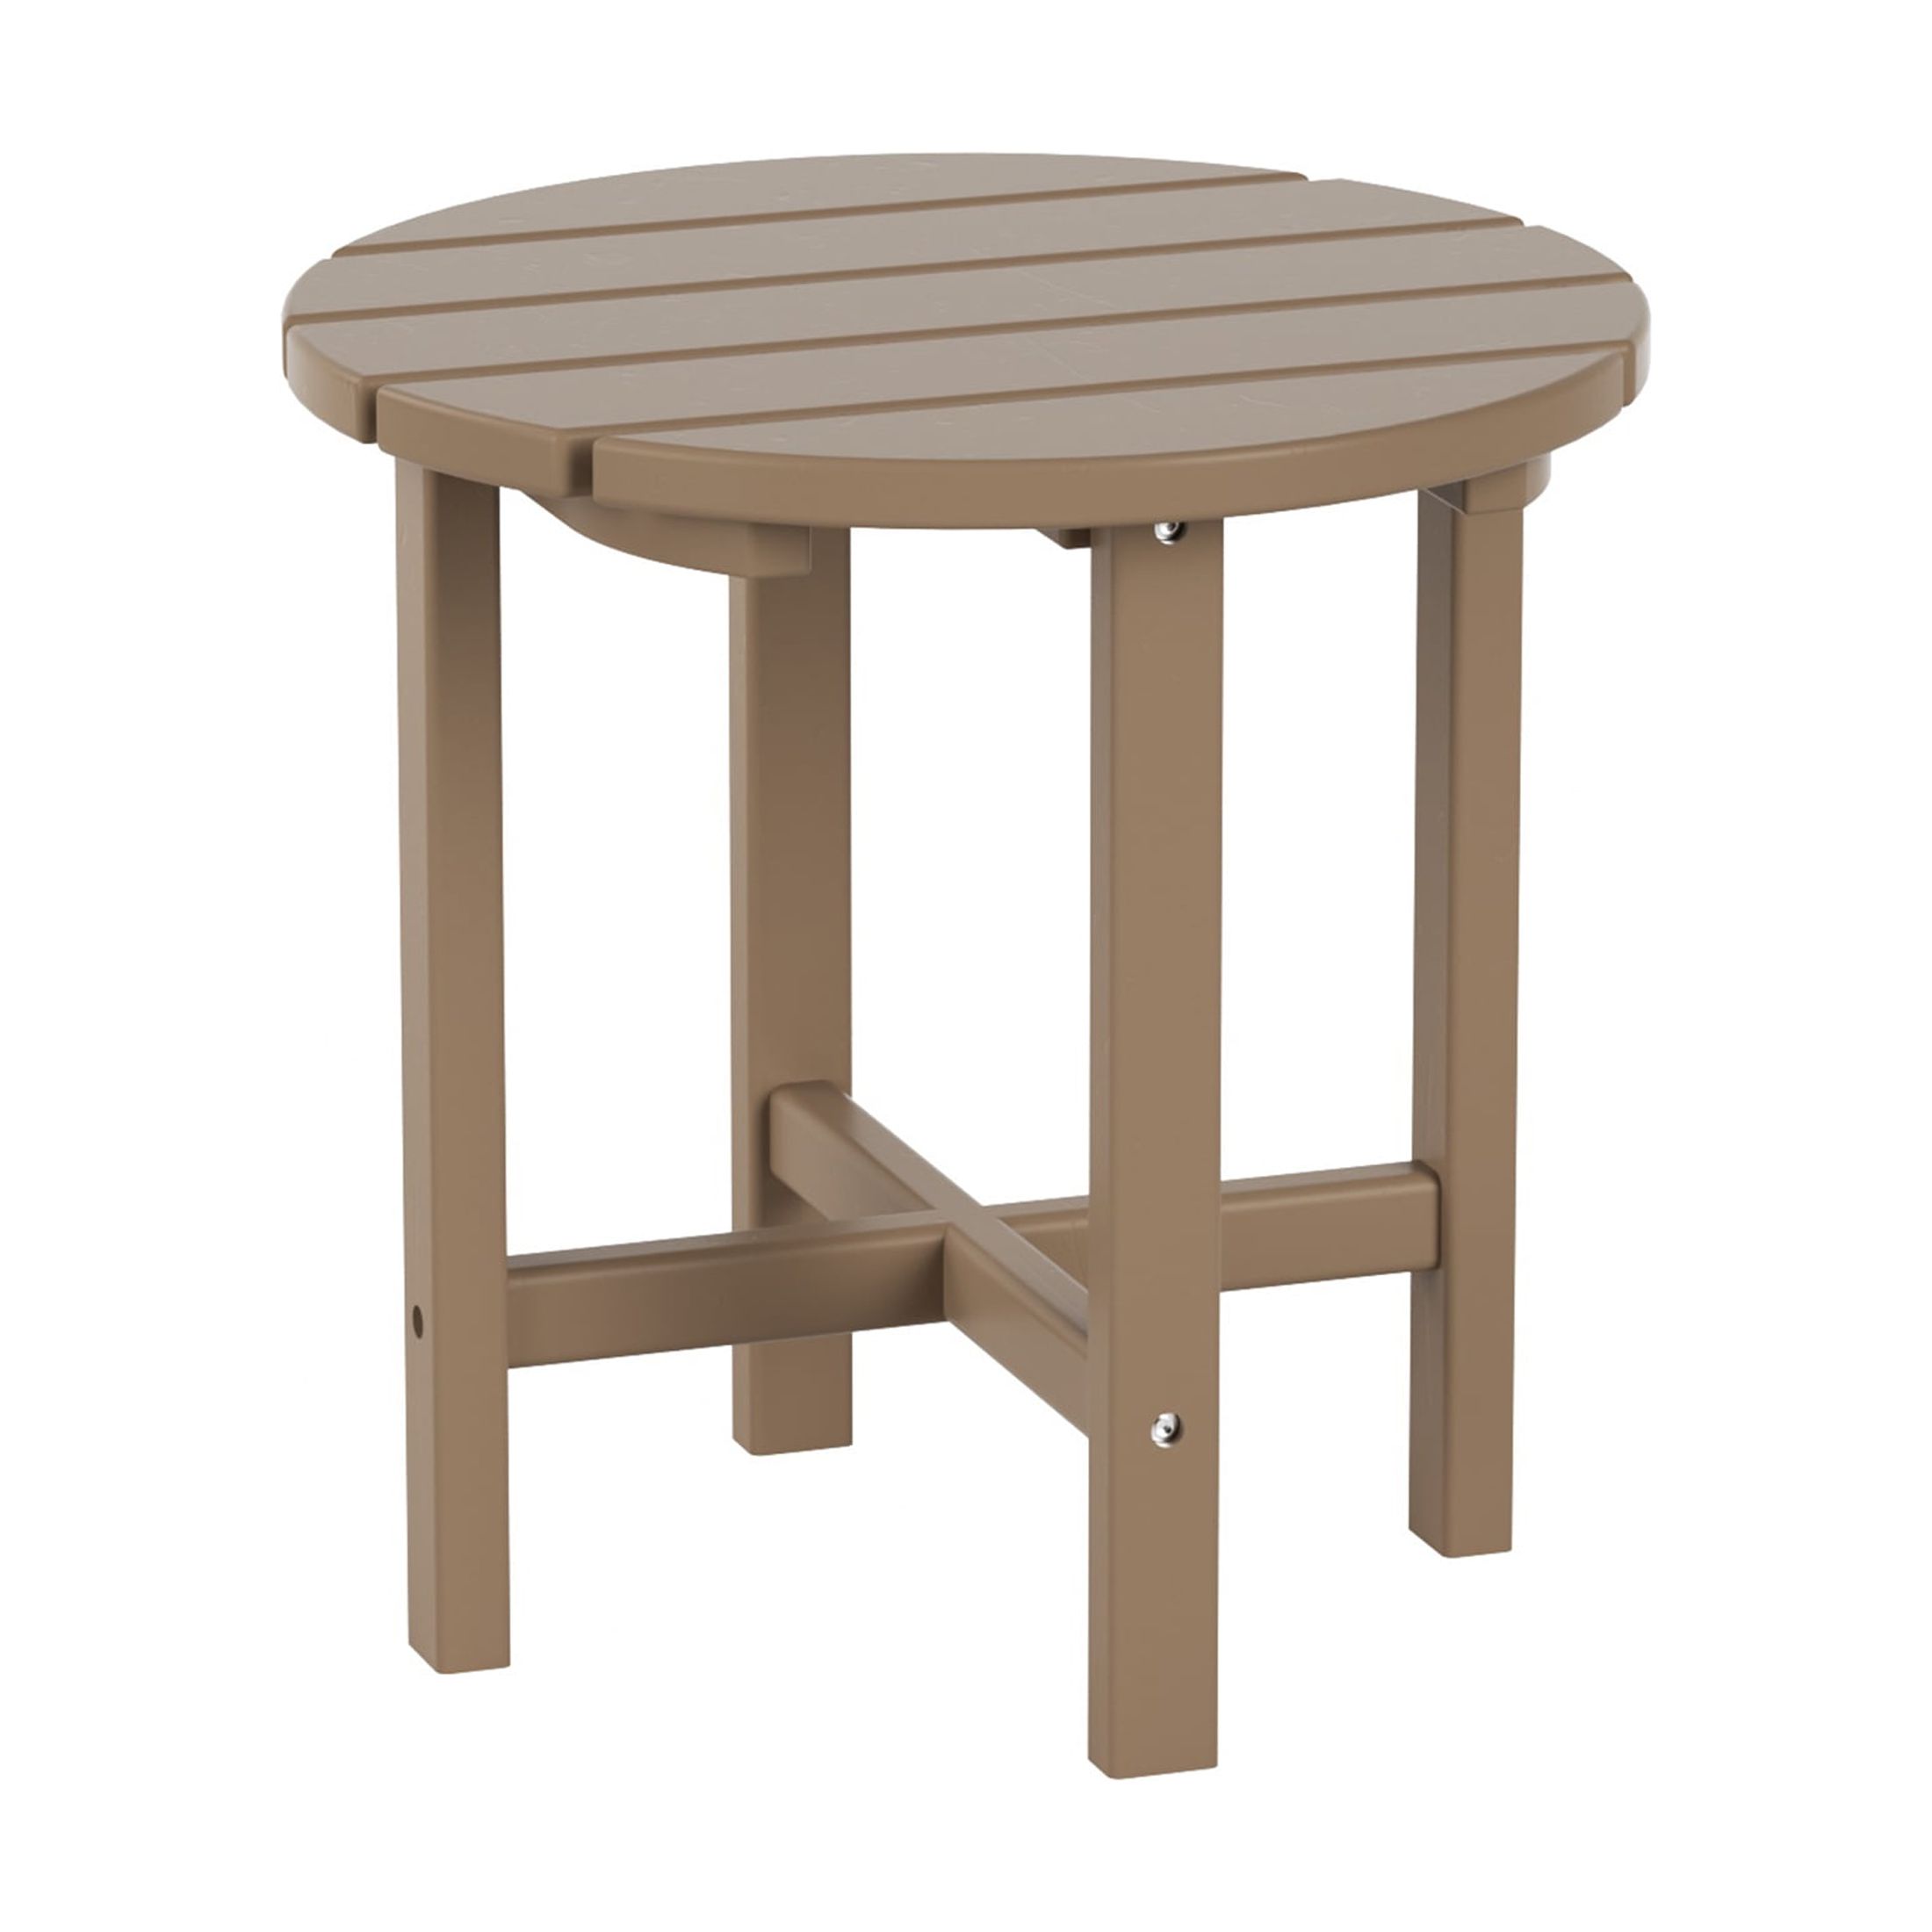 WestinTrends Outdoor Side Table, All Weather Poly Lumber Adirondack Small Patio Table Round End Table for Pool Balcony Deck Porch Lawn Backyard, Weathered Wood - image 1 of 7